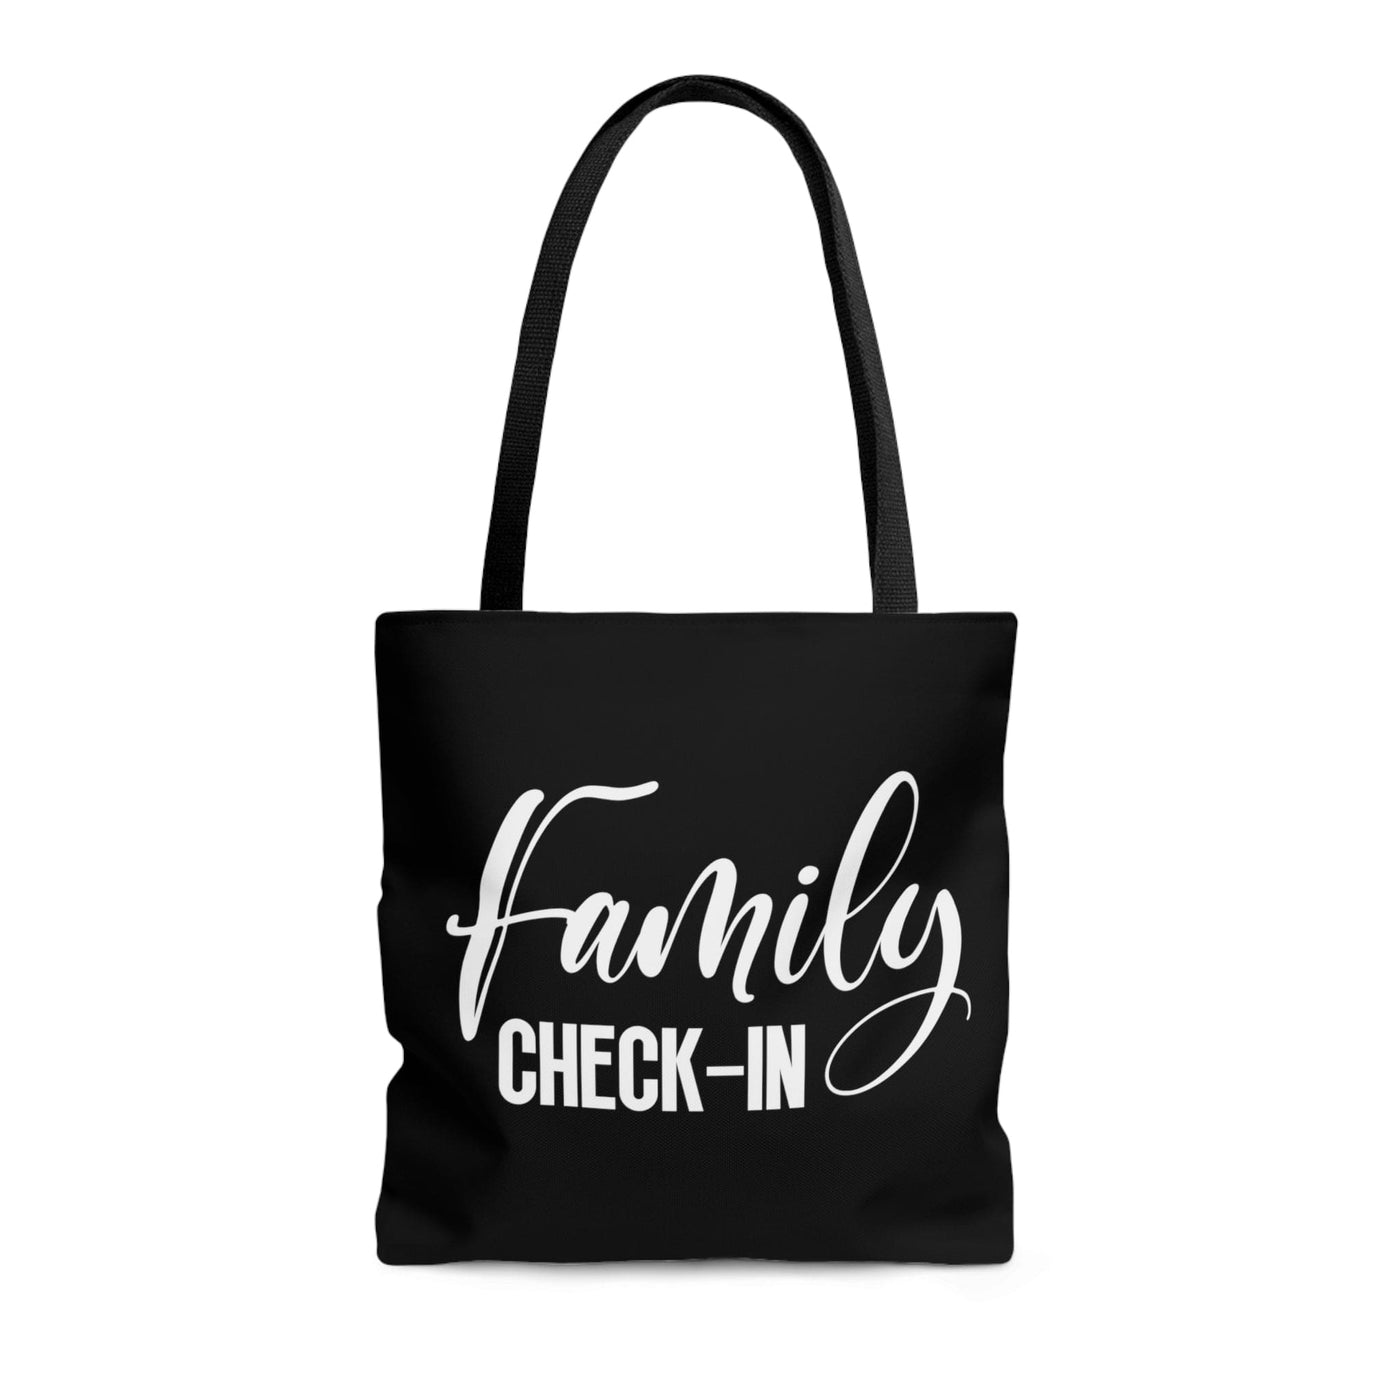 Canvas Tote Bag Family Check In Family Reunion Family Fun Family Events - Bags